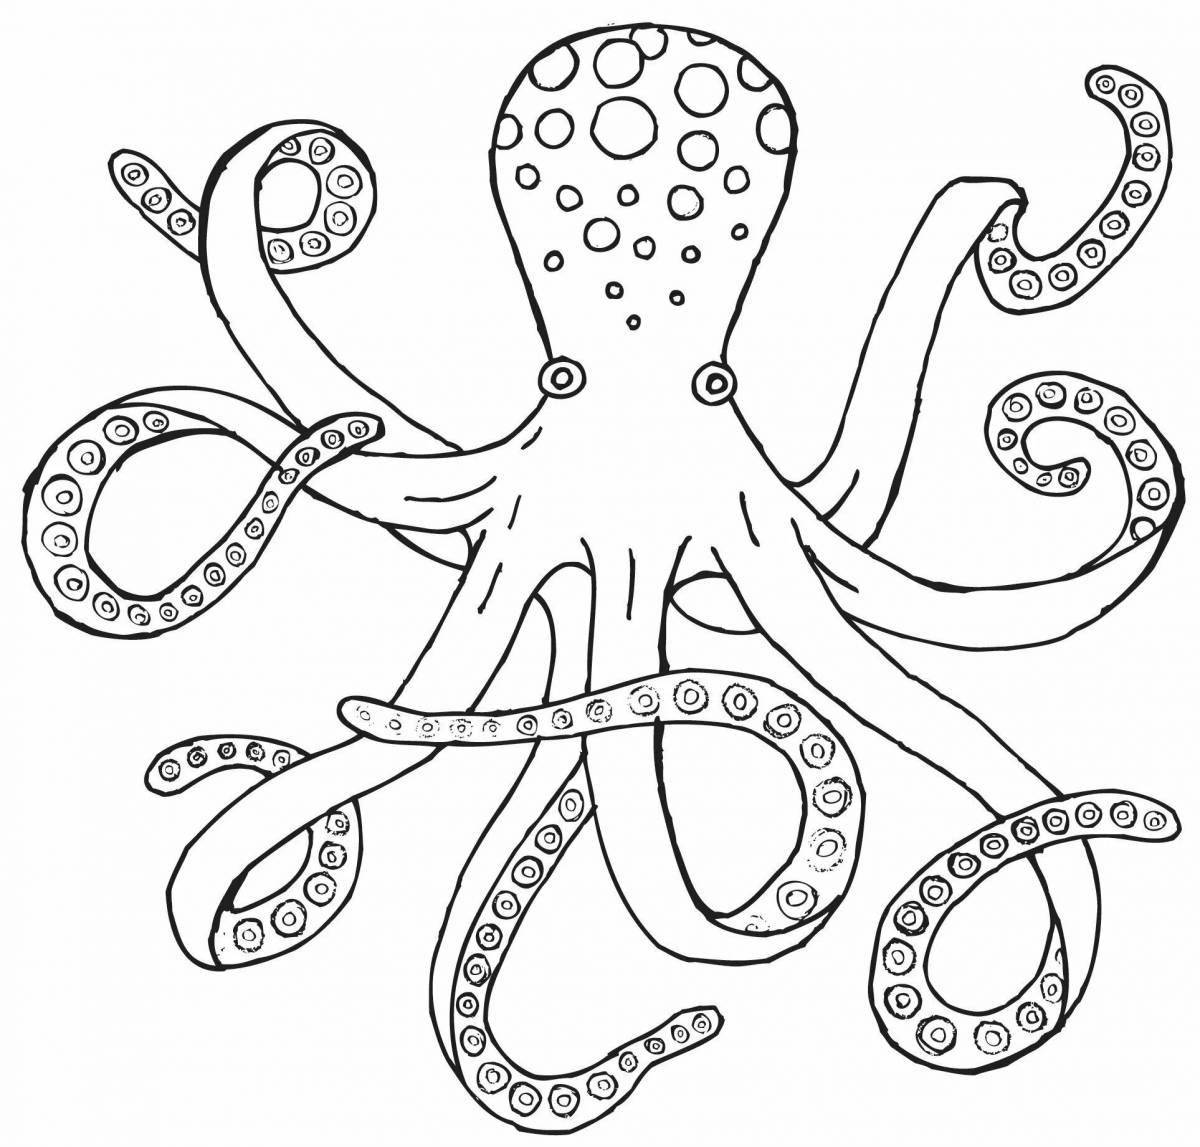 Creative squid coloring for kids